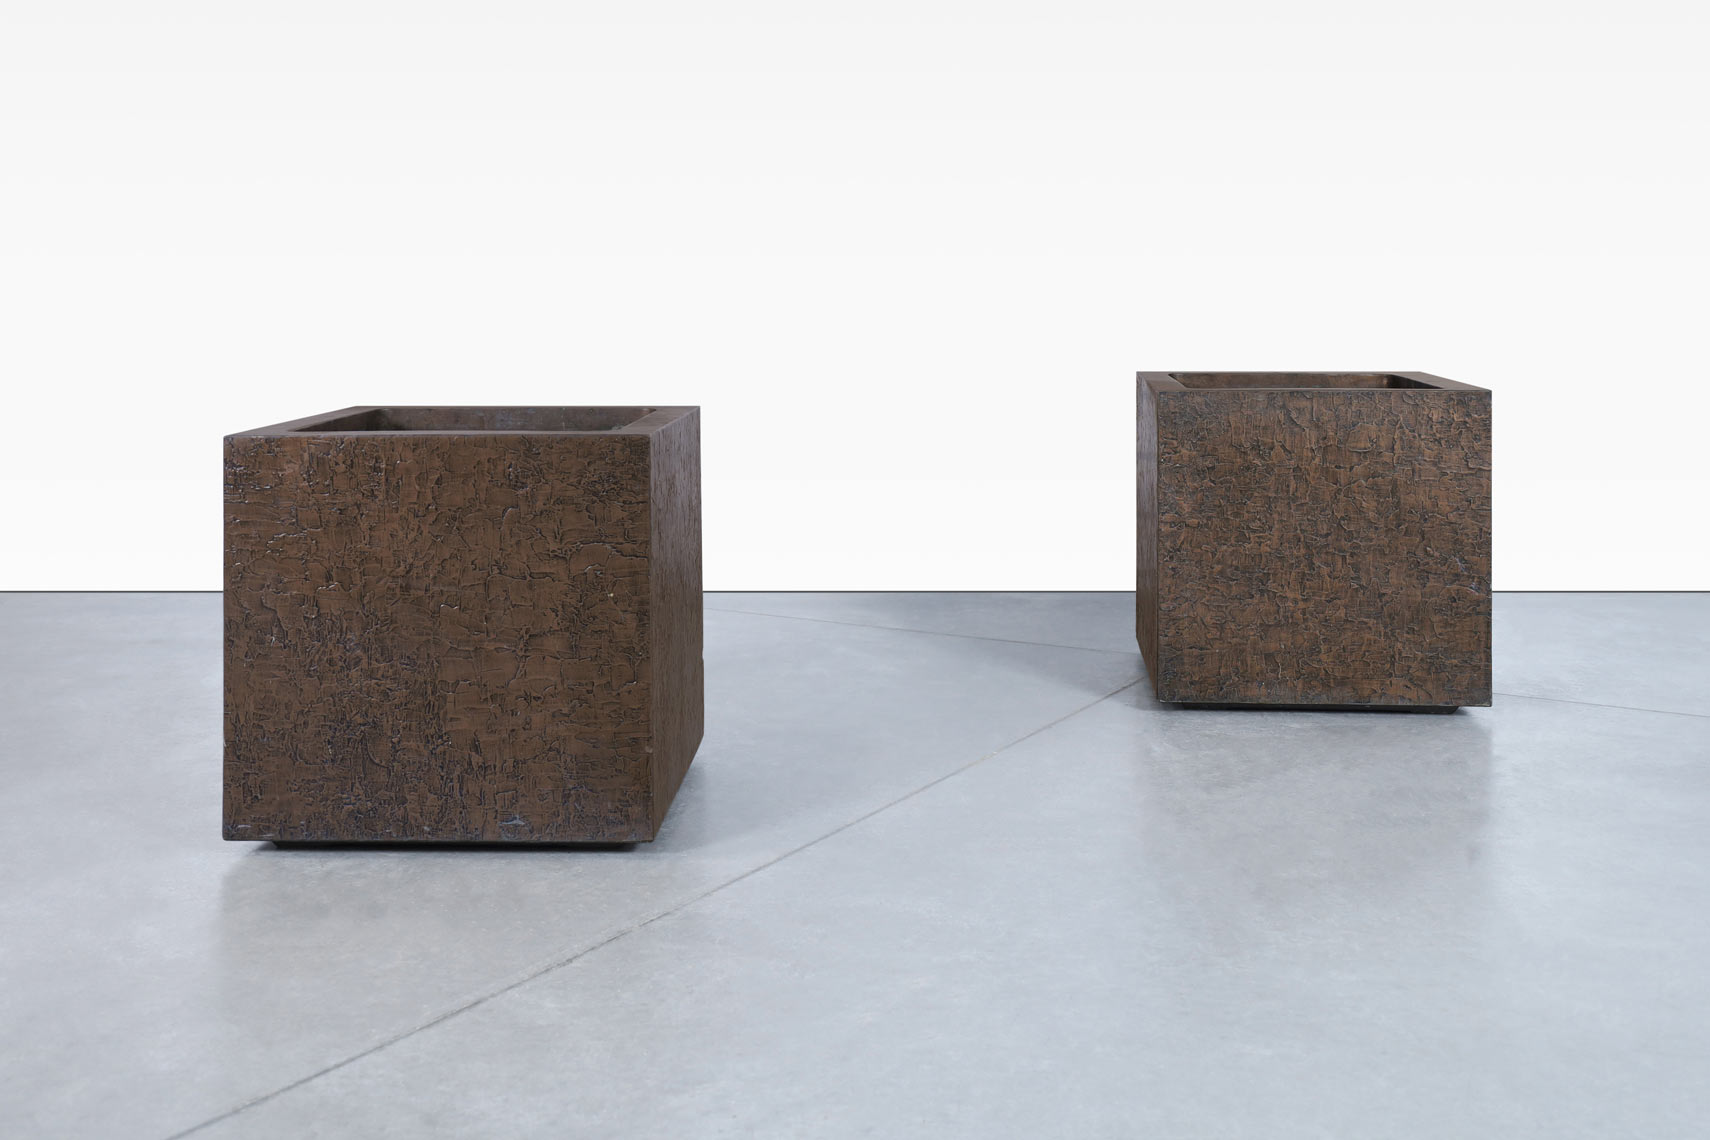 Mid-Century Modern Bronze Resin Square Planters by Forms and Surfaces